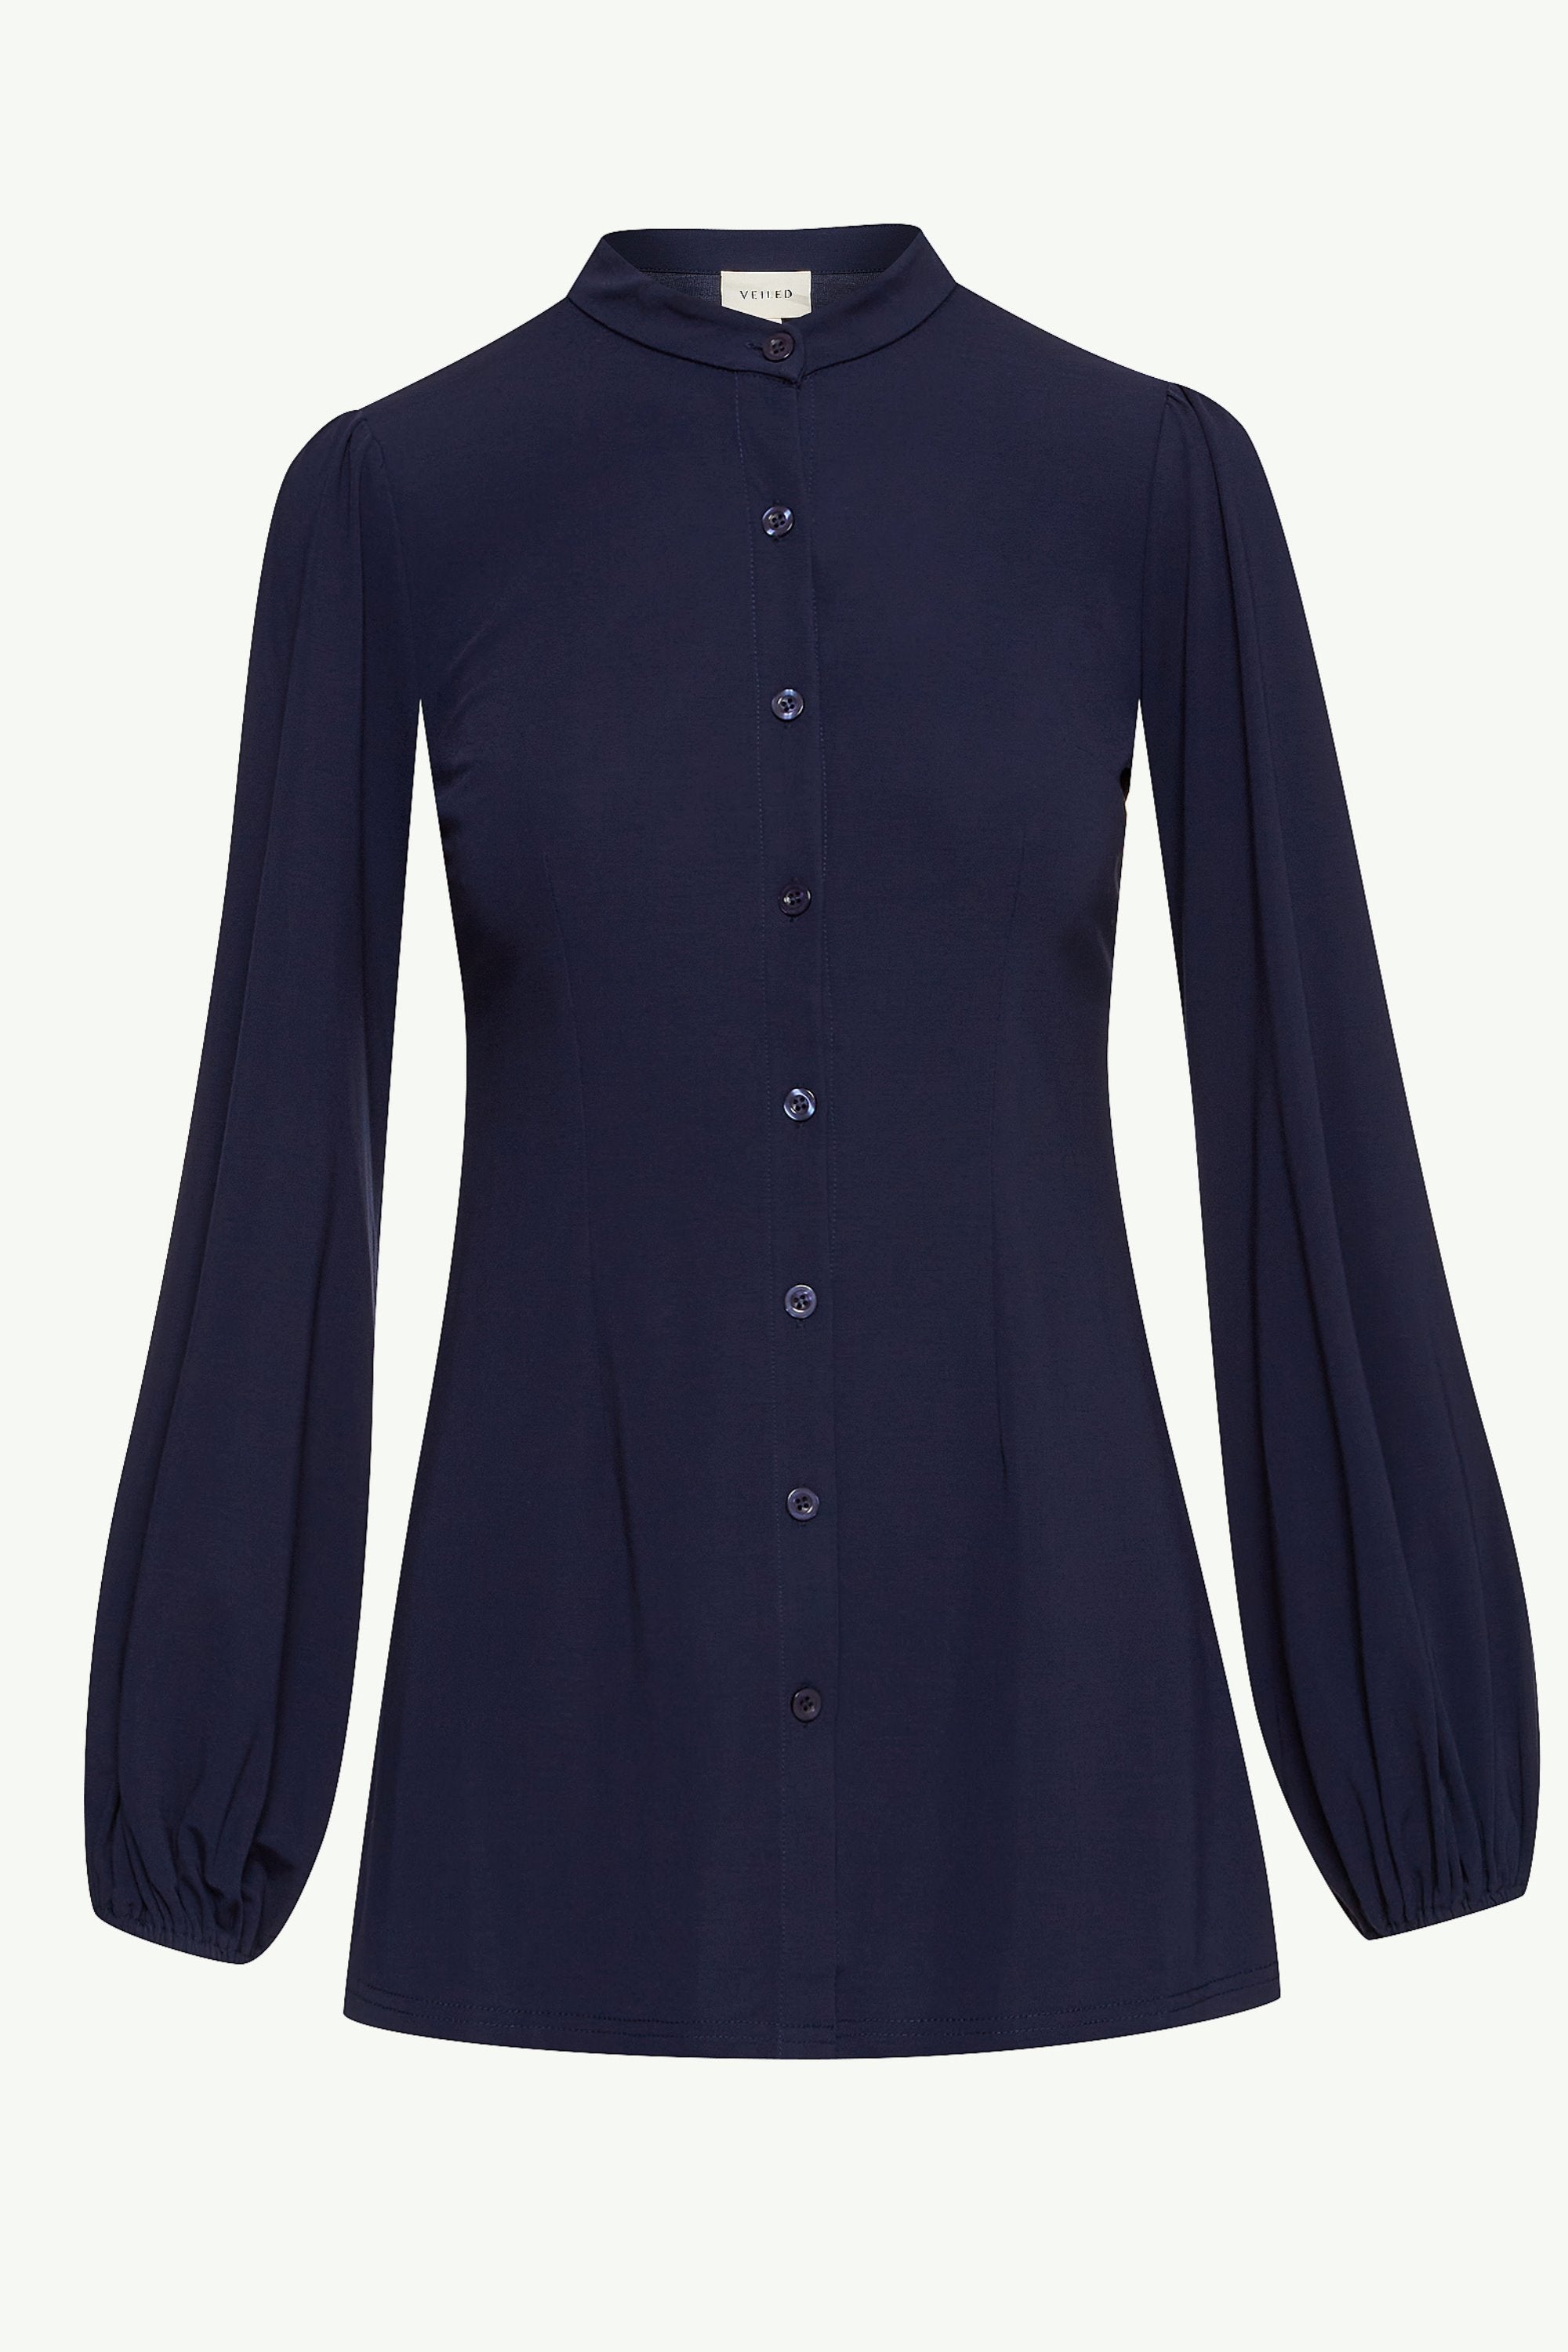 Rayana Jersey Button Down Top - Navy Blue Clothing Veiled 